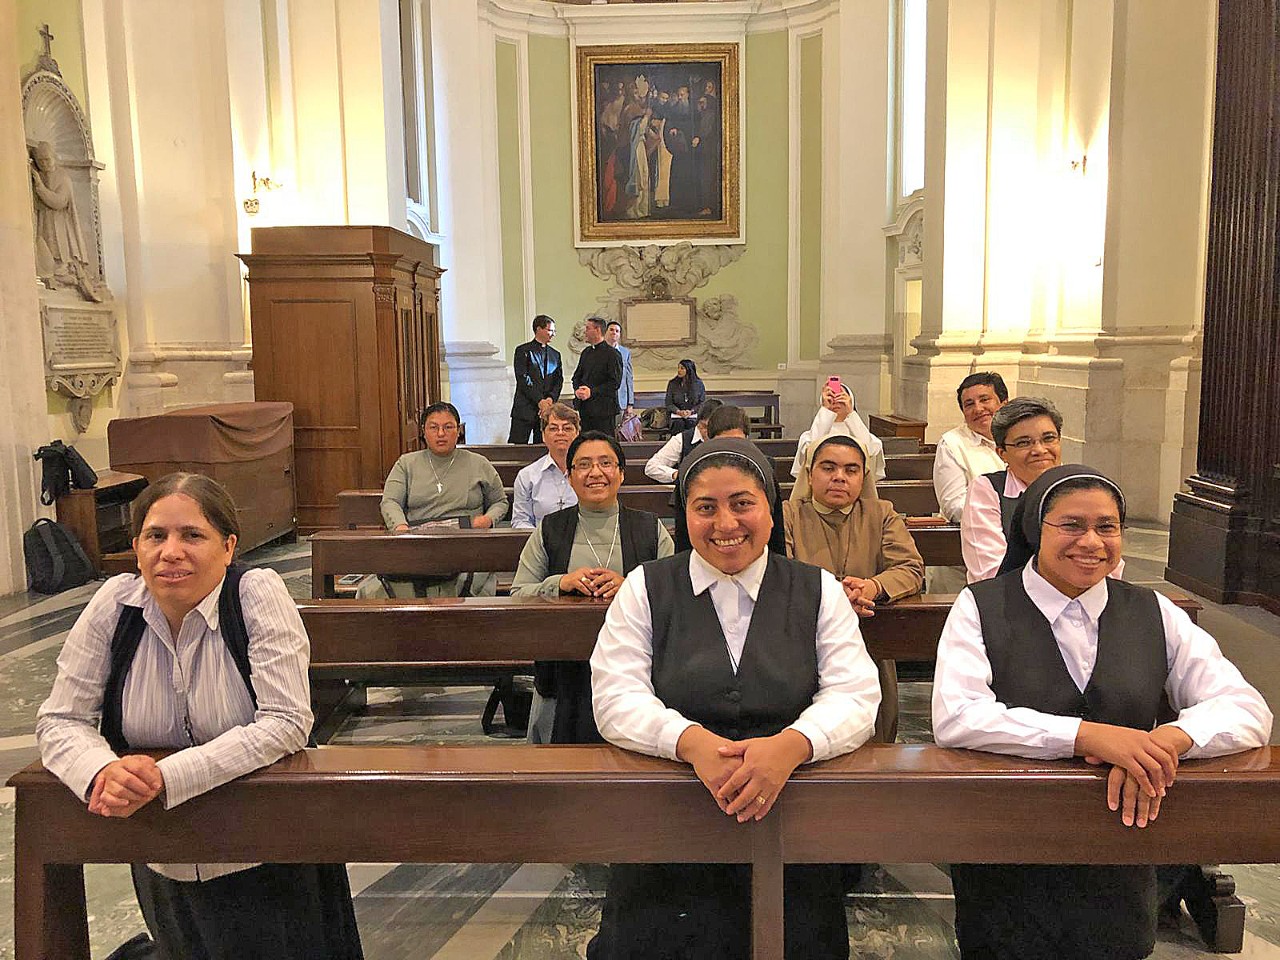 Woods College Latin American Sisters in Rome: attending Mass